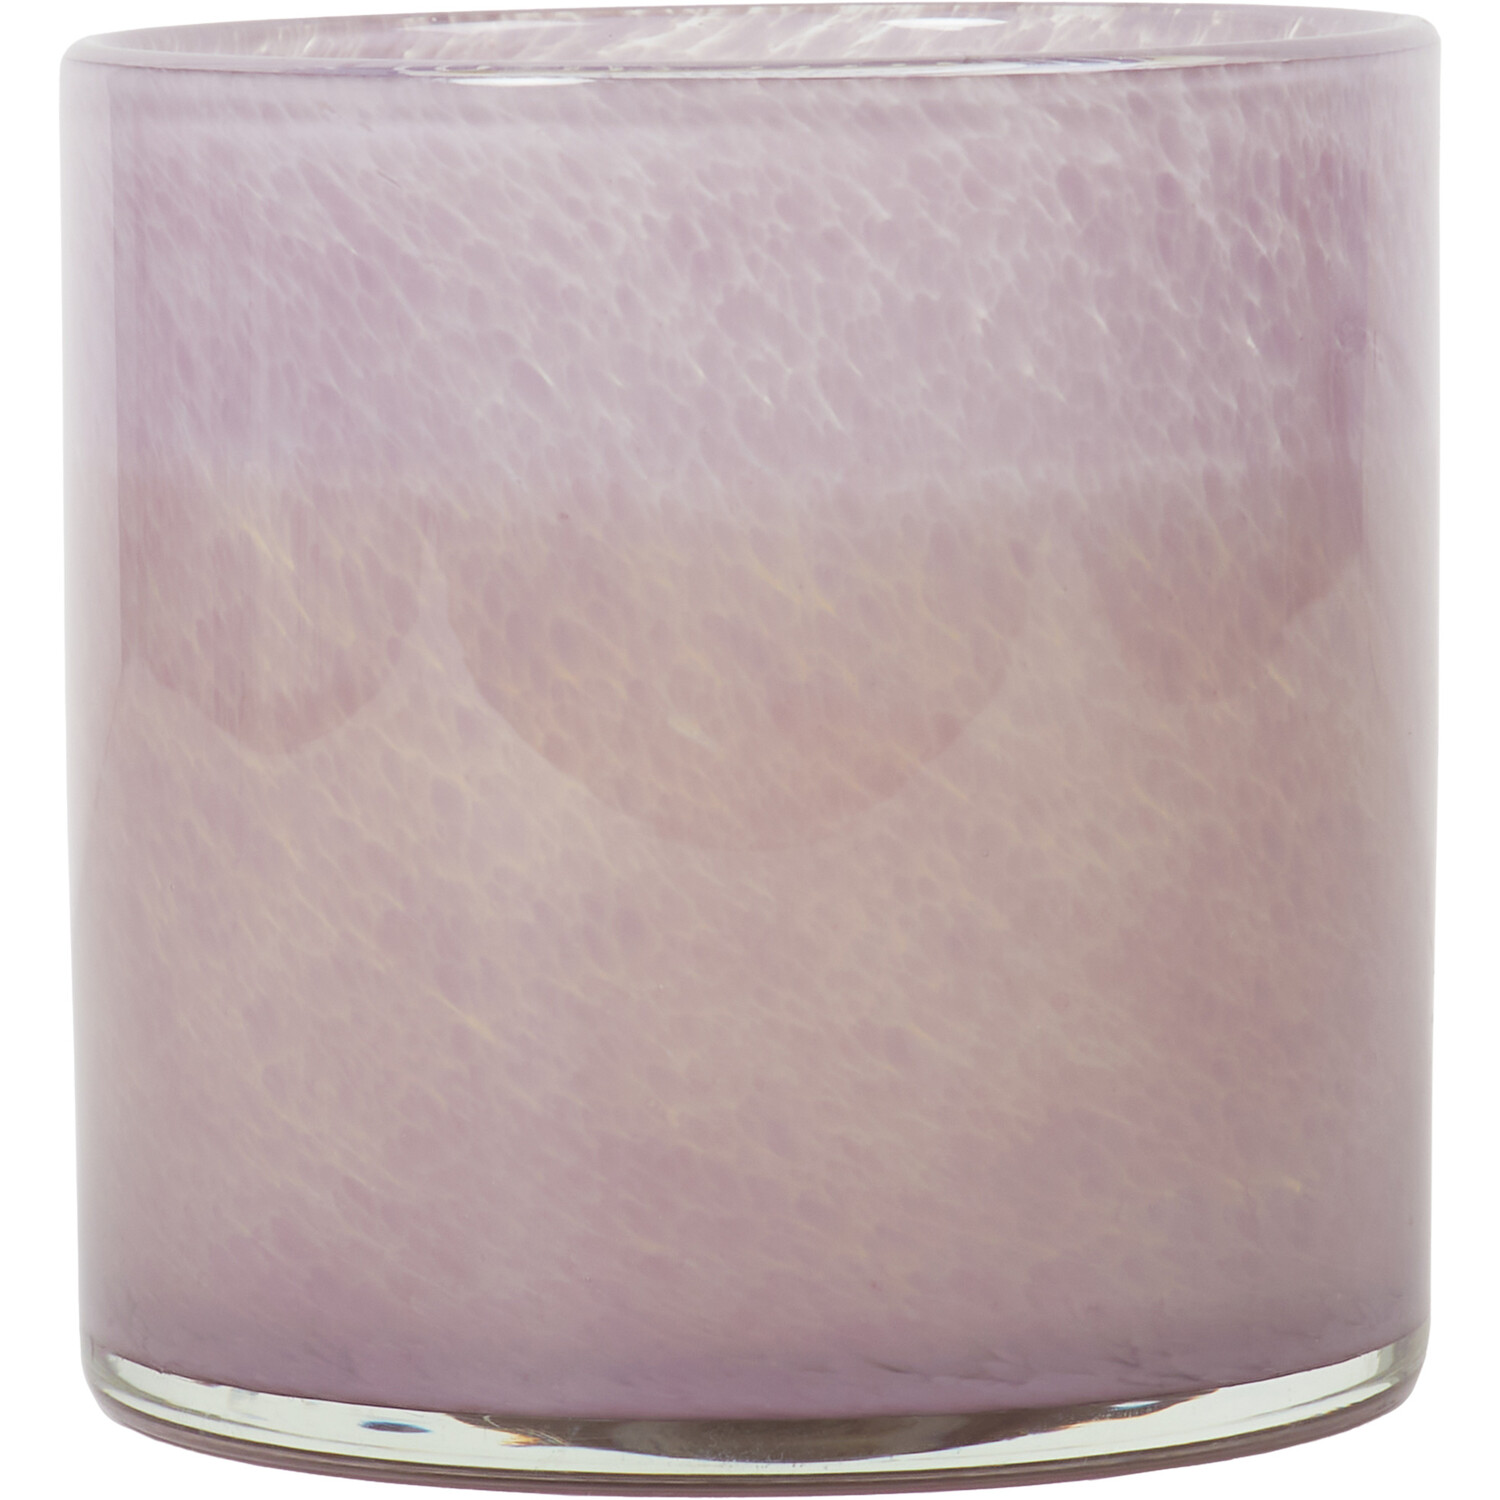 Early Morning Garden Candle - Purple Image 1